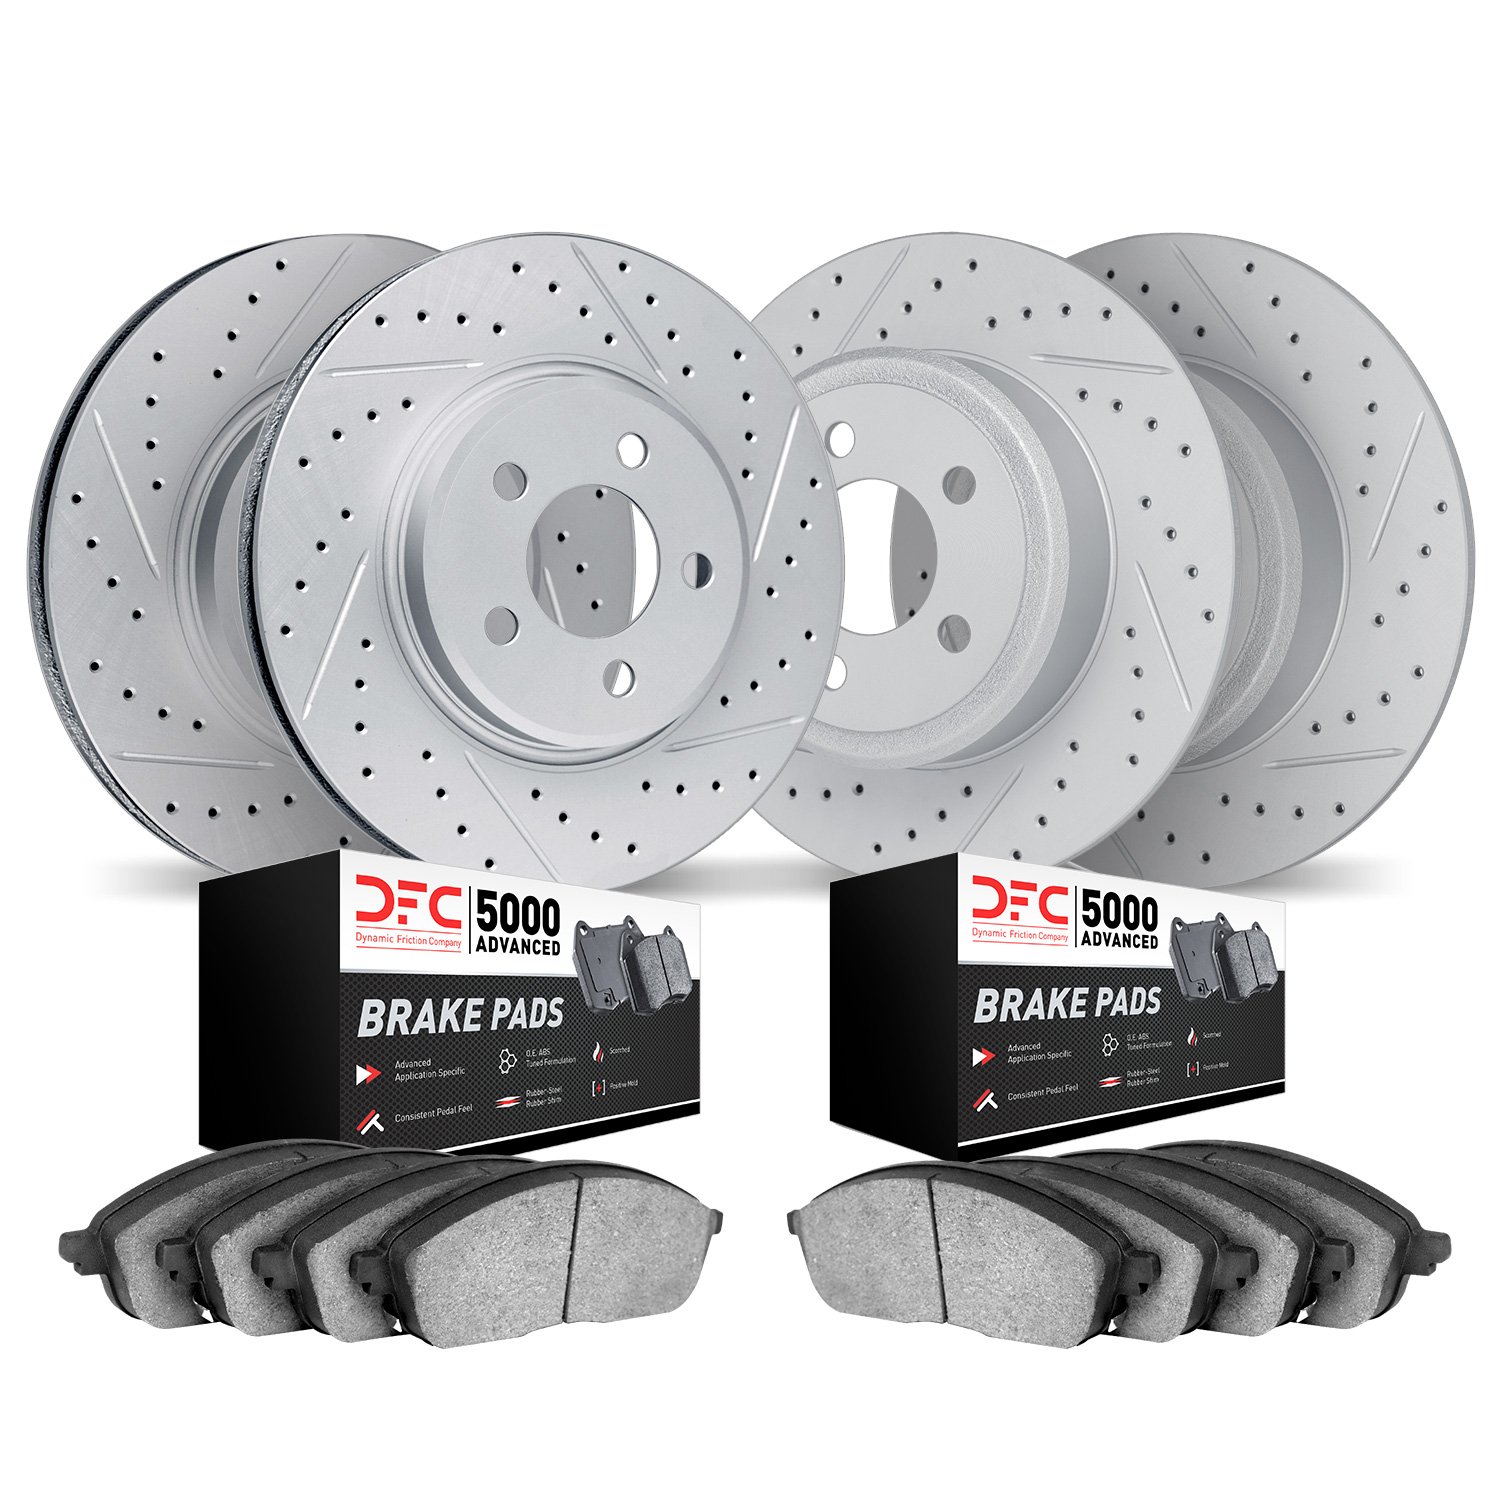 2504-45025 Geoperformance Drilled/Slotted Rotors w/5000 Advanced Brake Pads Kit, 2013-2017 GM, Position: Front and Rear